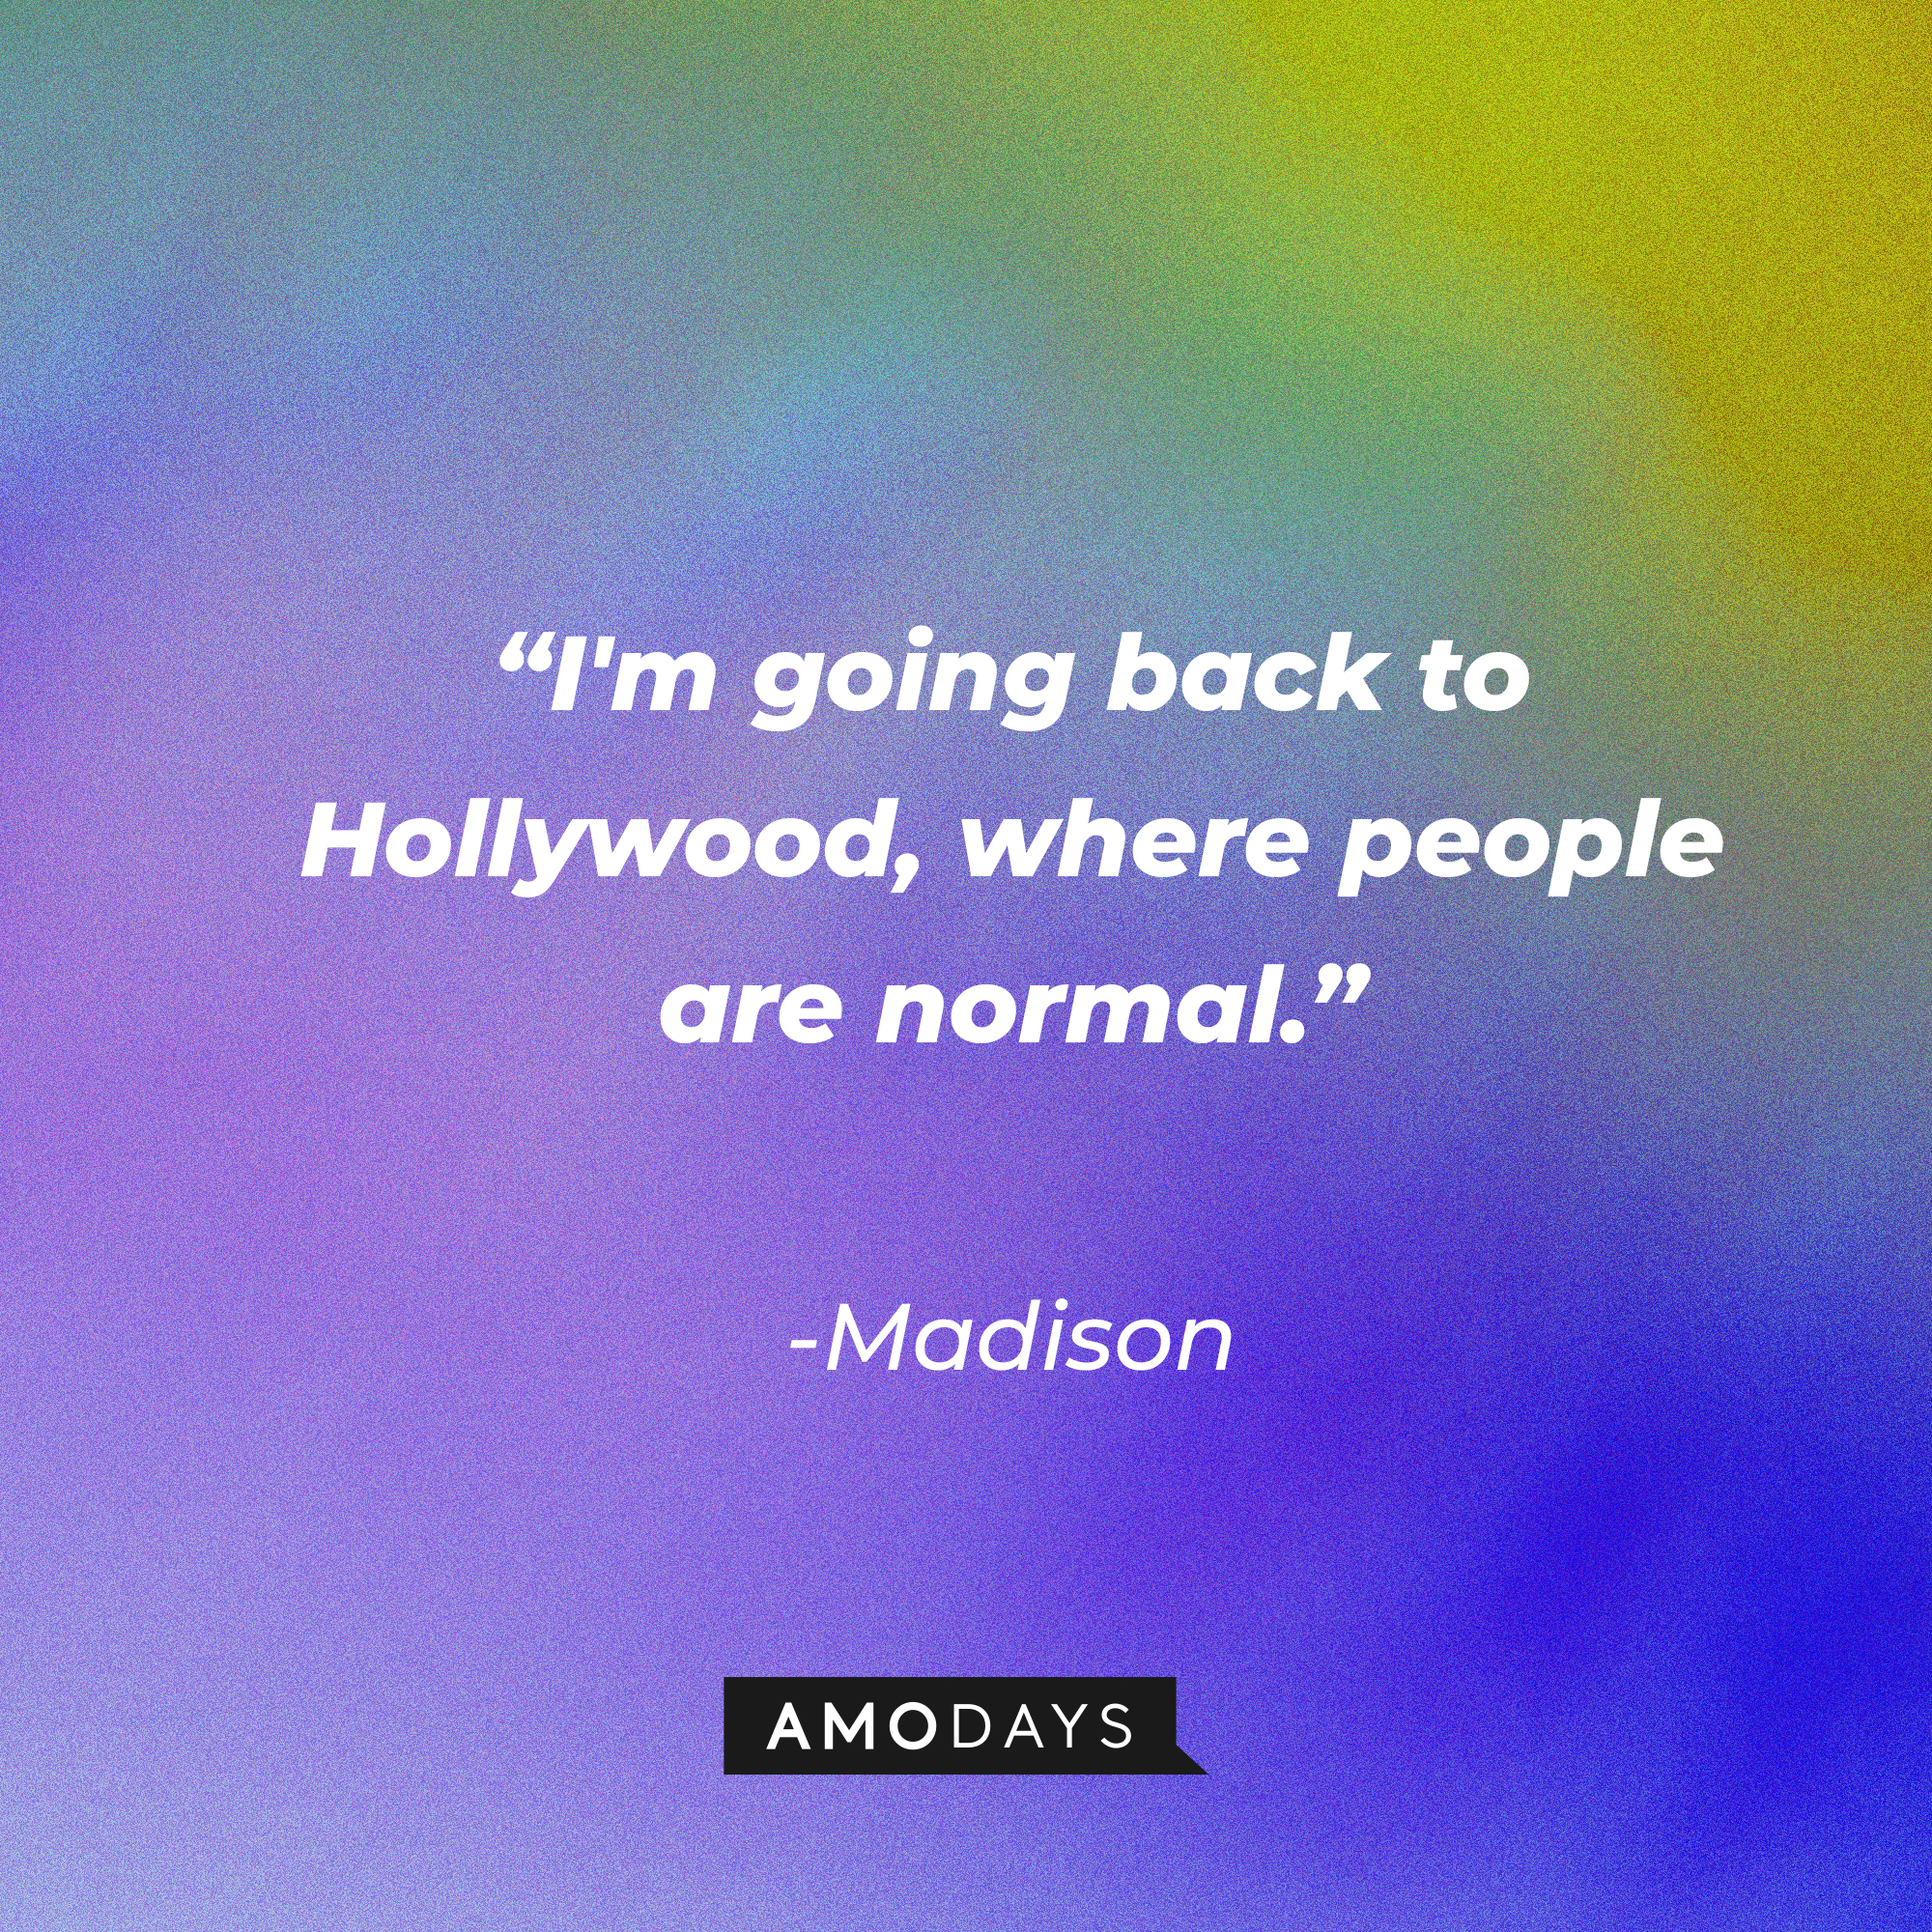 Madison’s quote:  "I'm going back to Hollywood, where people are normal." | Source: AmoDays